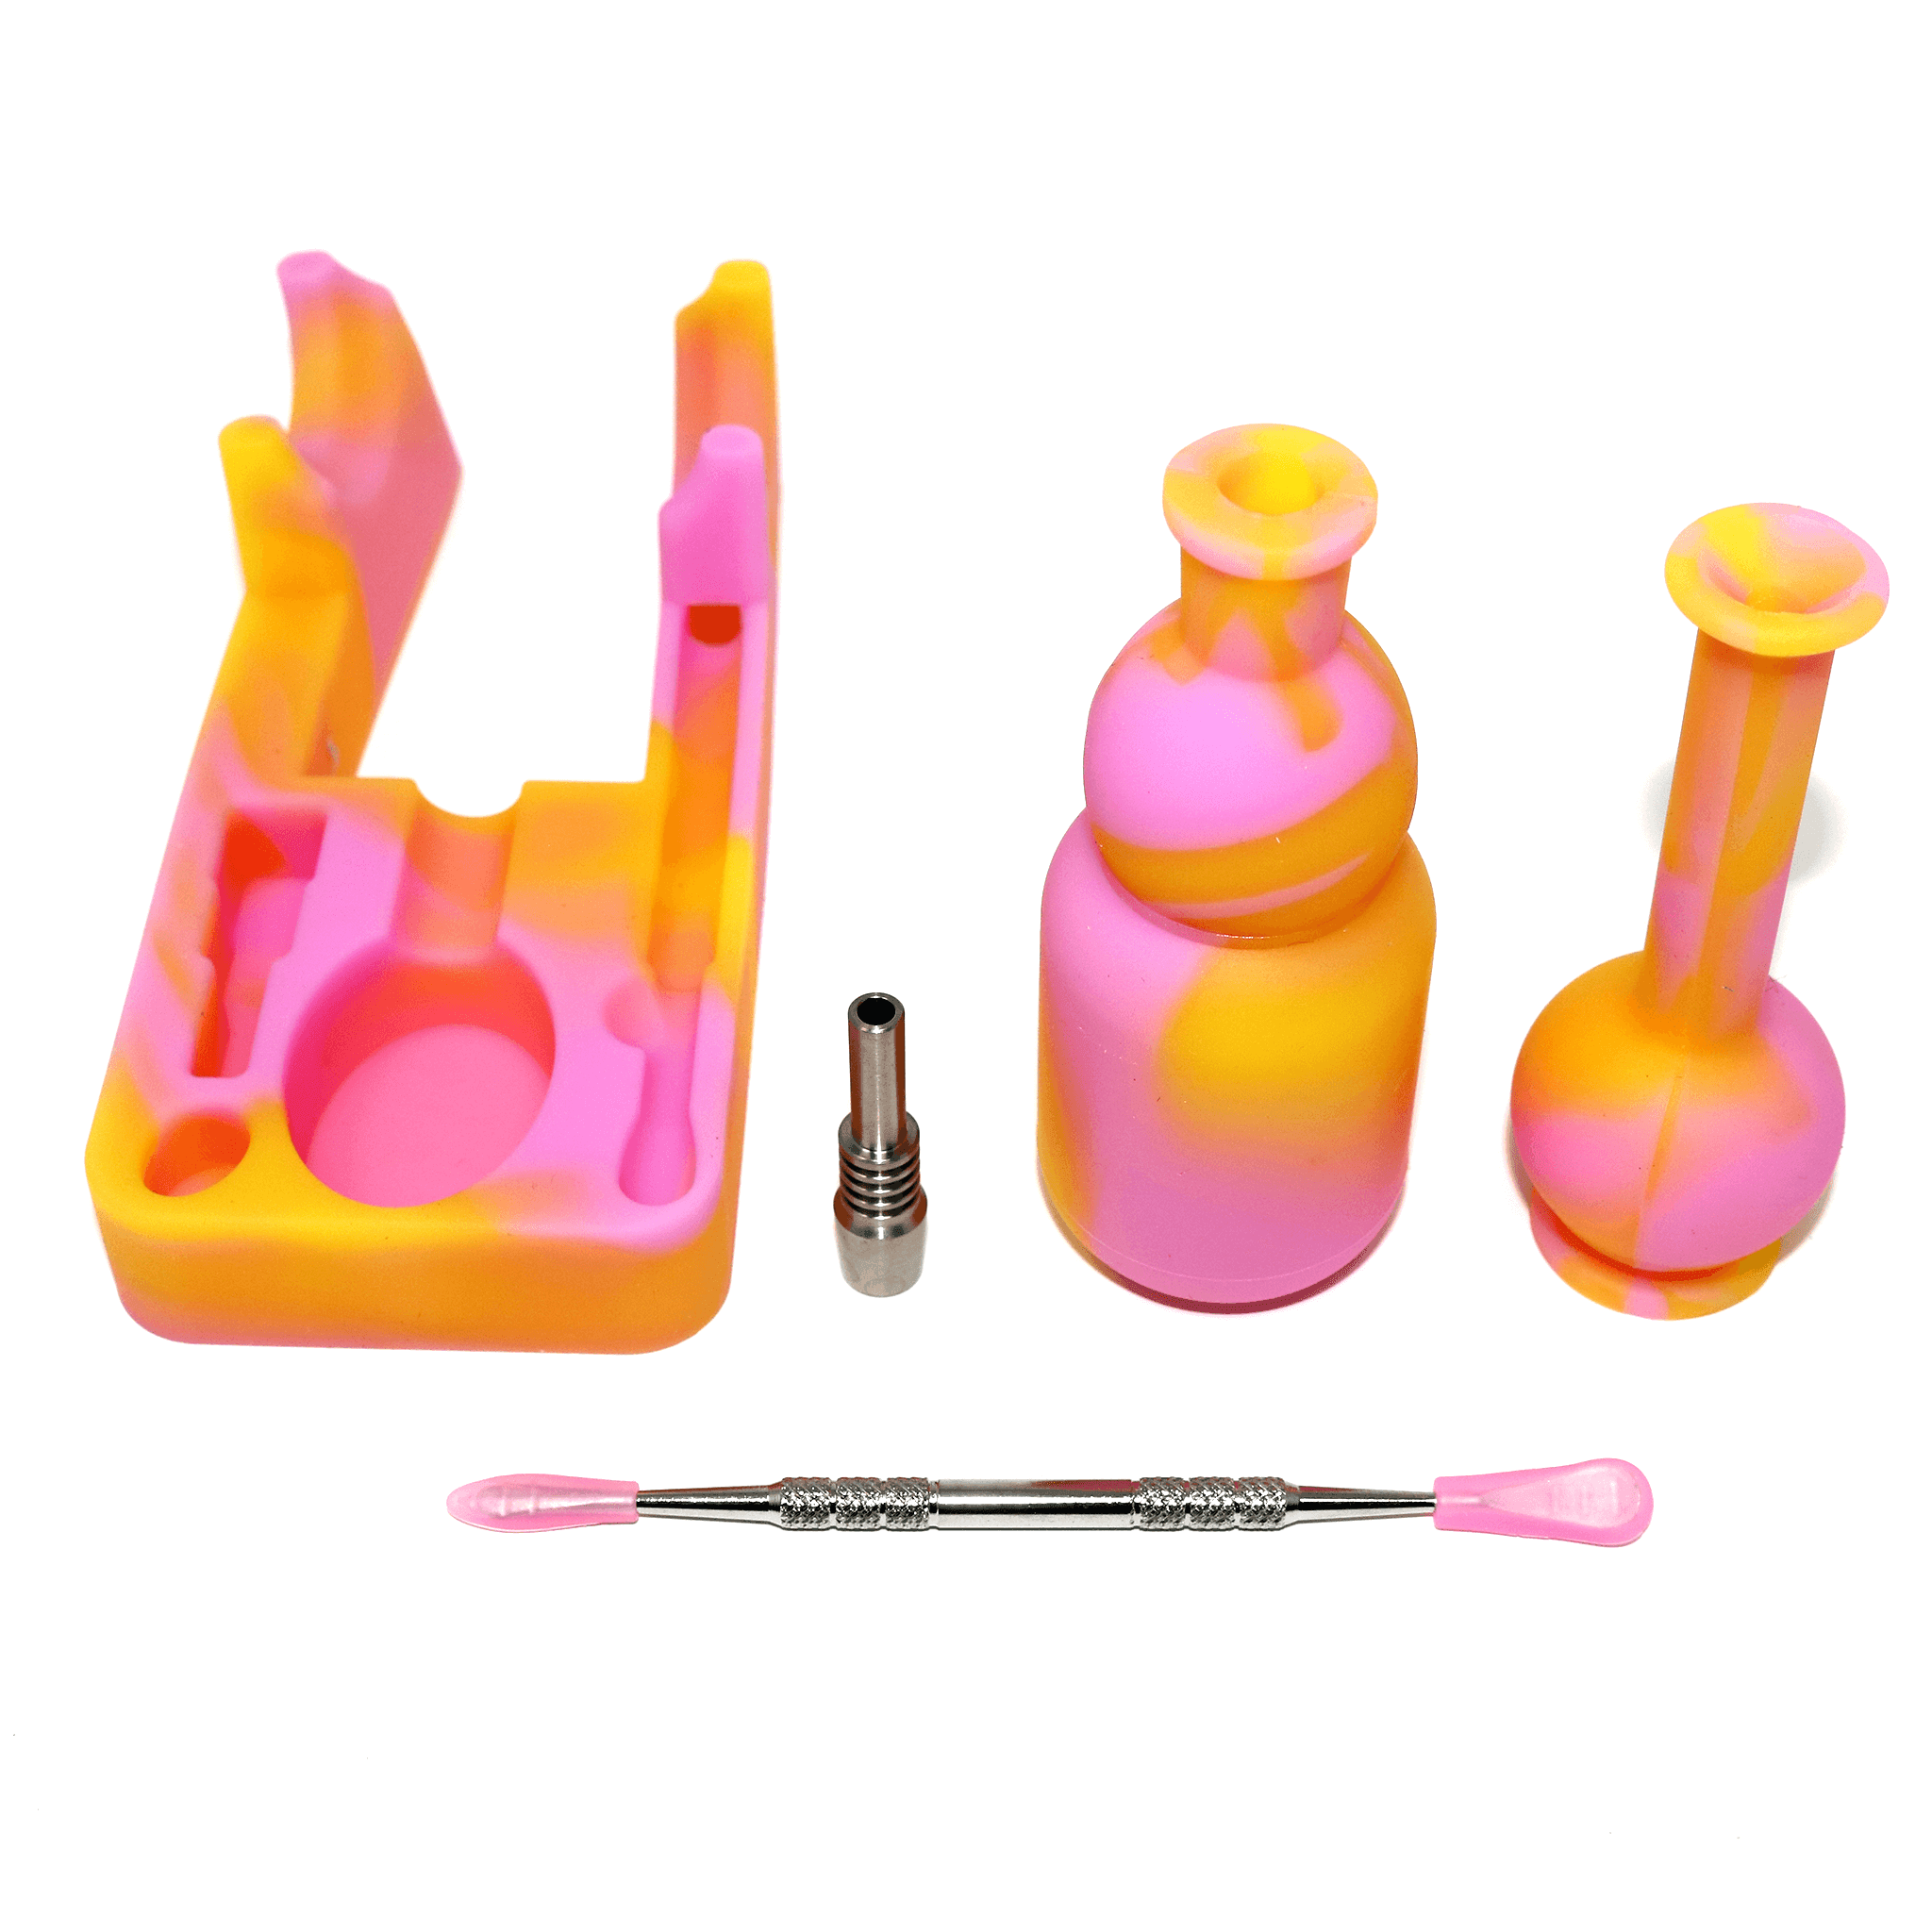 Silicone Nectar Collector Kit - 204 Grams - 10 Inches - Assorted Colors  [NC49] (MSRP $13.00)